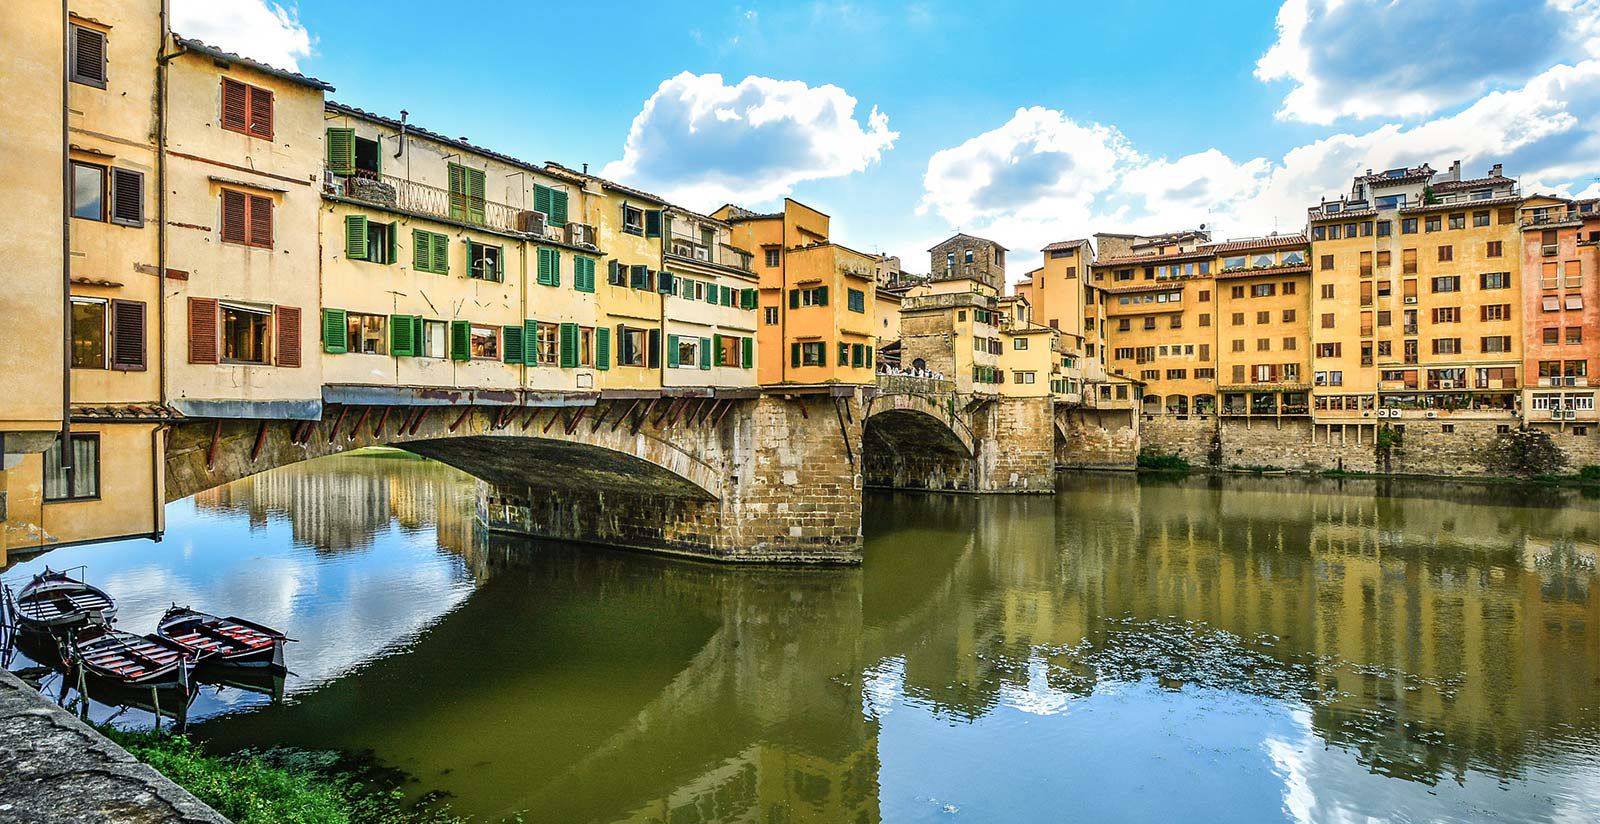 STAY AT PENDINI AND EASILY REACH PONTE VECCHIO 4